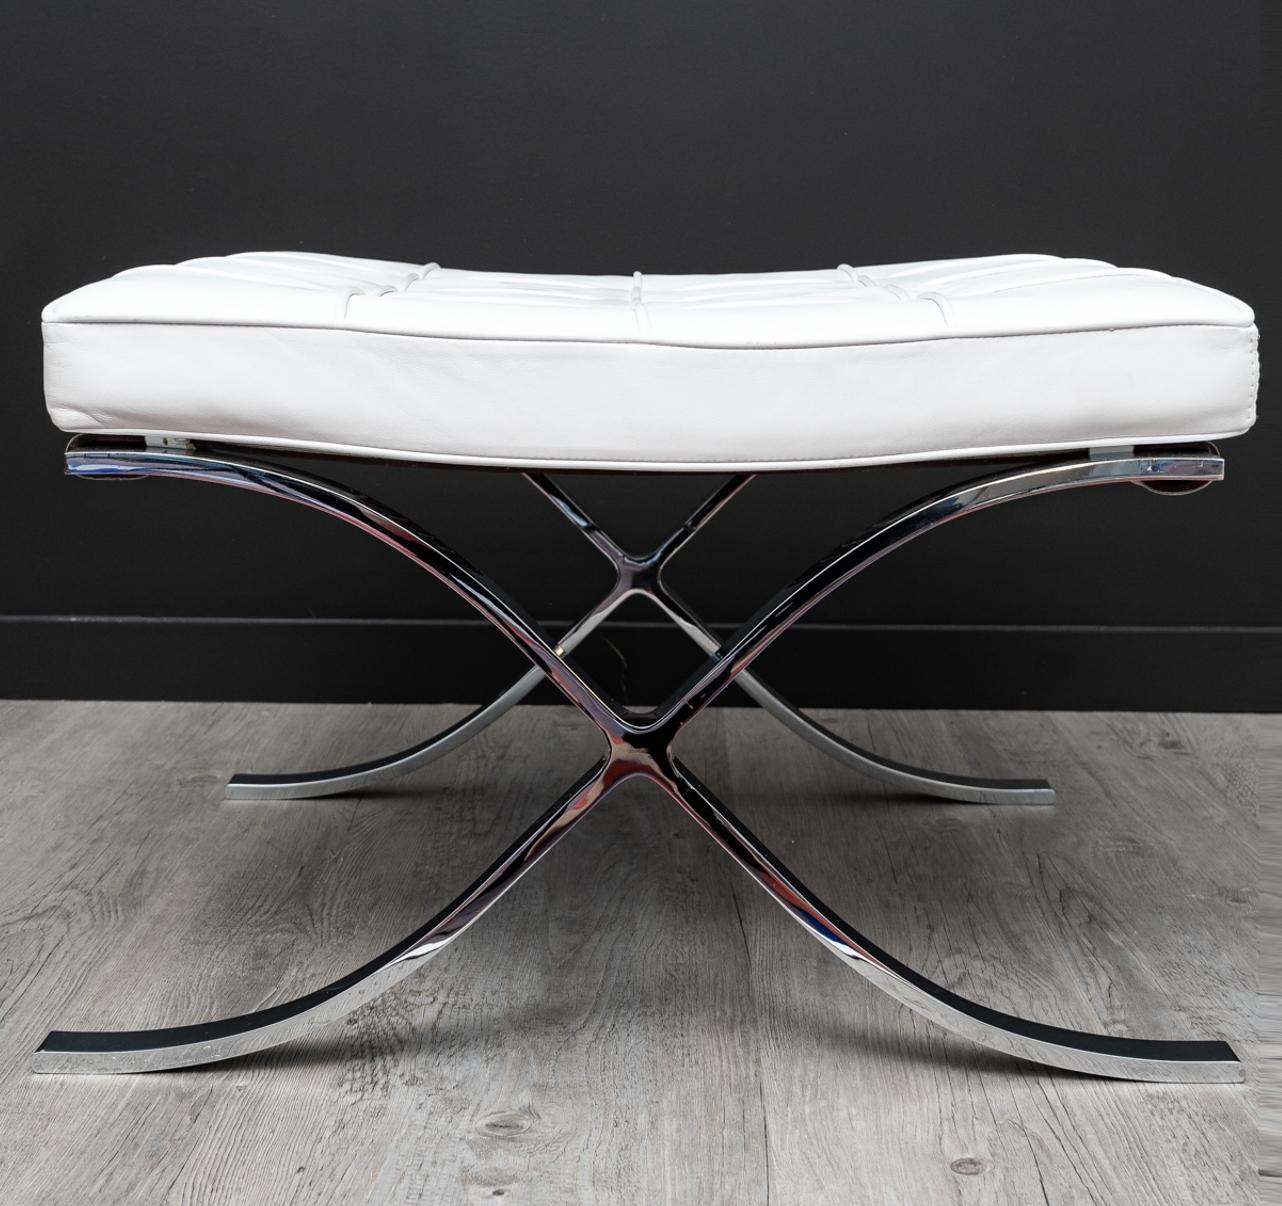 Barcelona Ottoman Stool designed by Ludwig Mies van der Rohe in 1929.

Edition in white leather by Knoll International, circa 2000.

Chrome frame with leather straps.

KnollStudio signature engraved on the structure.

Embroidered Knoll Logo